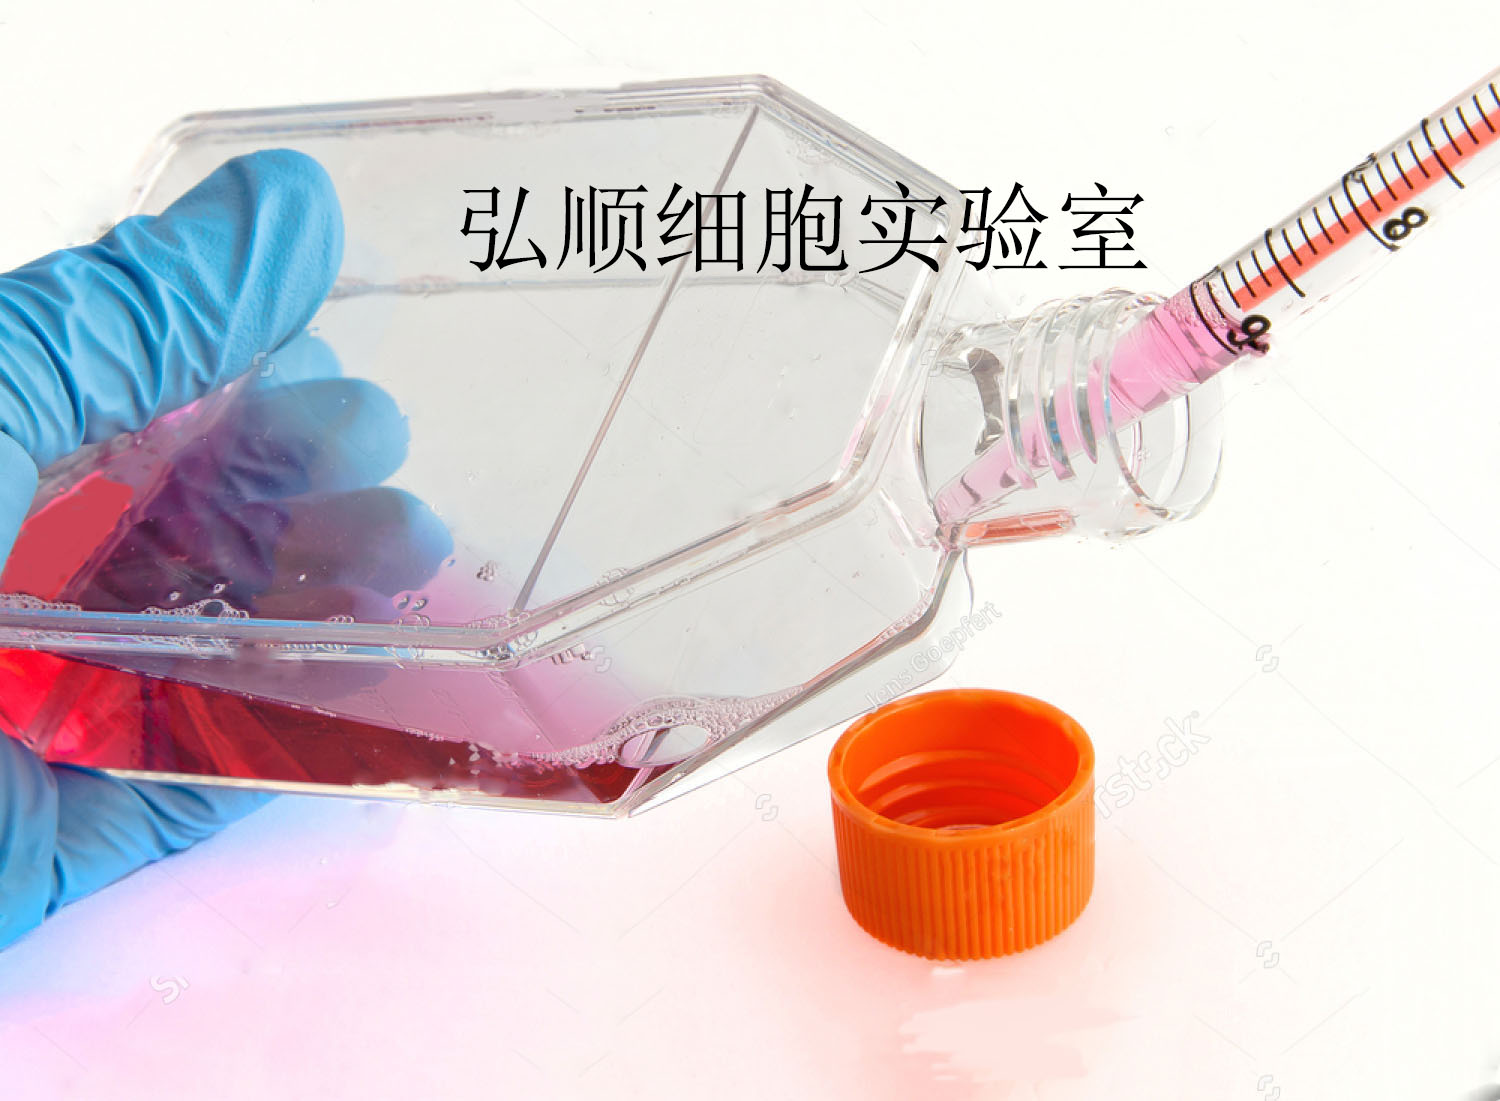 HepaRG|人肝癌细胞,HepaRG Cell